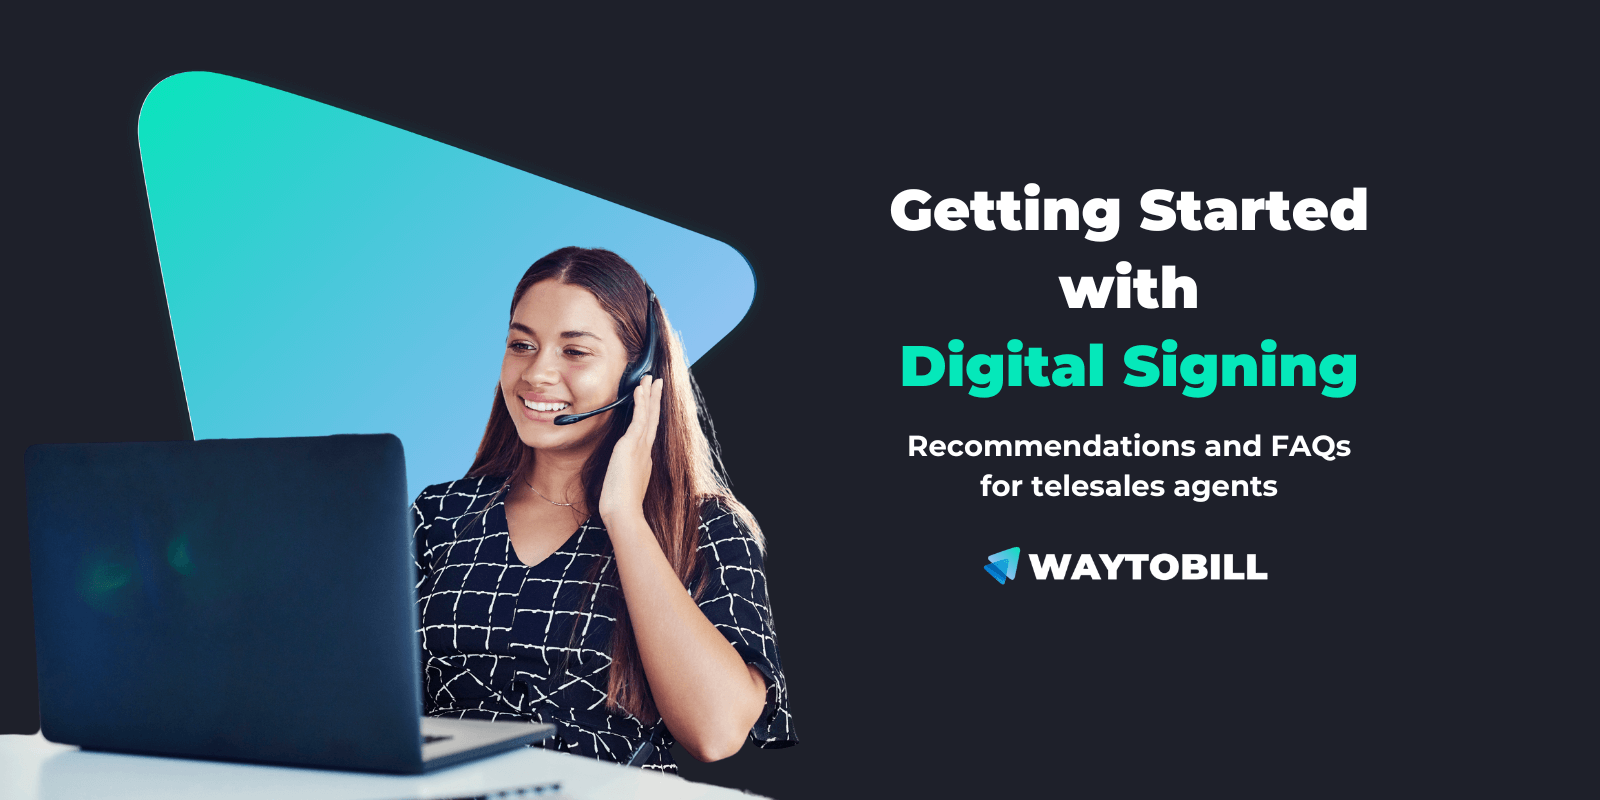 Starting with Digital Signing: FAQs & Recommendations for Telesales